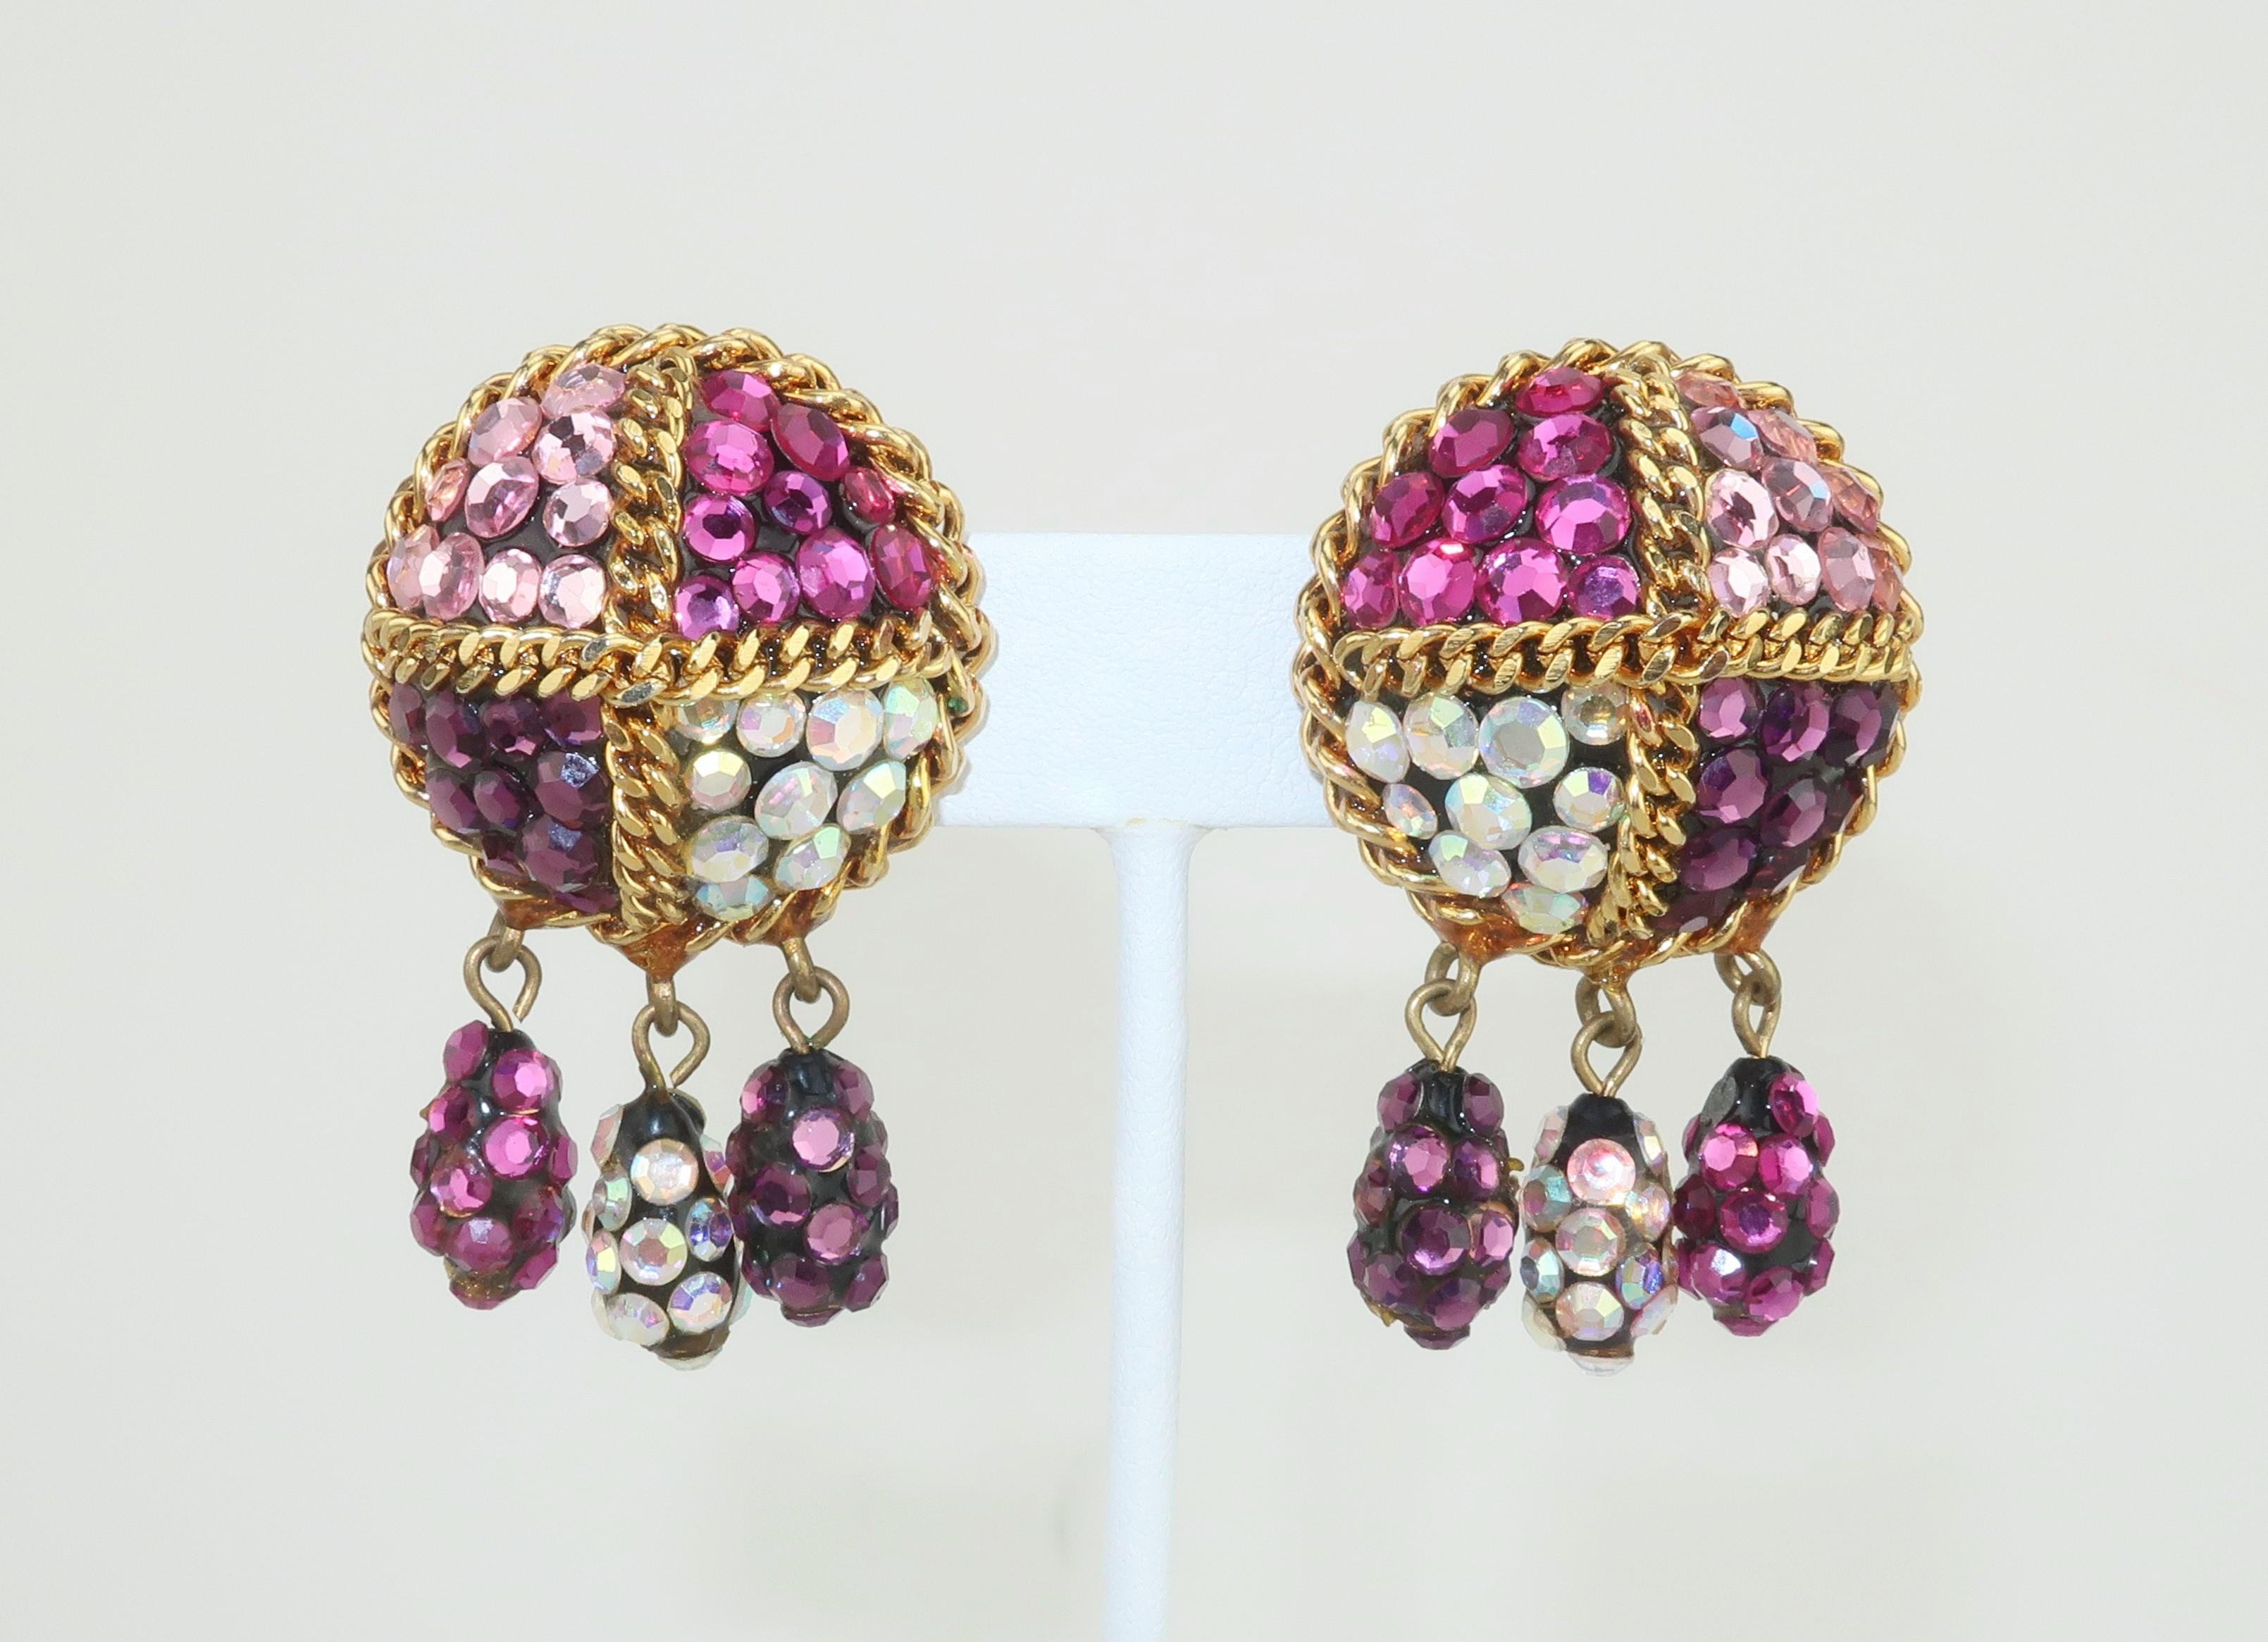 1980's Margaret Squires pave crystal clip on earrings with chain accents and drop dangles.  The crystals are in shades of hot pink, plum, pale pink and champagne on a black resin base.  Designer's label affixed to the back of each